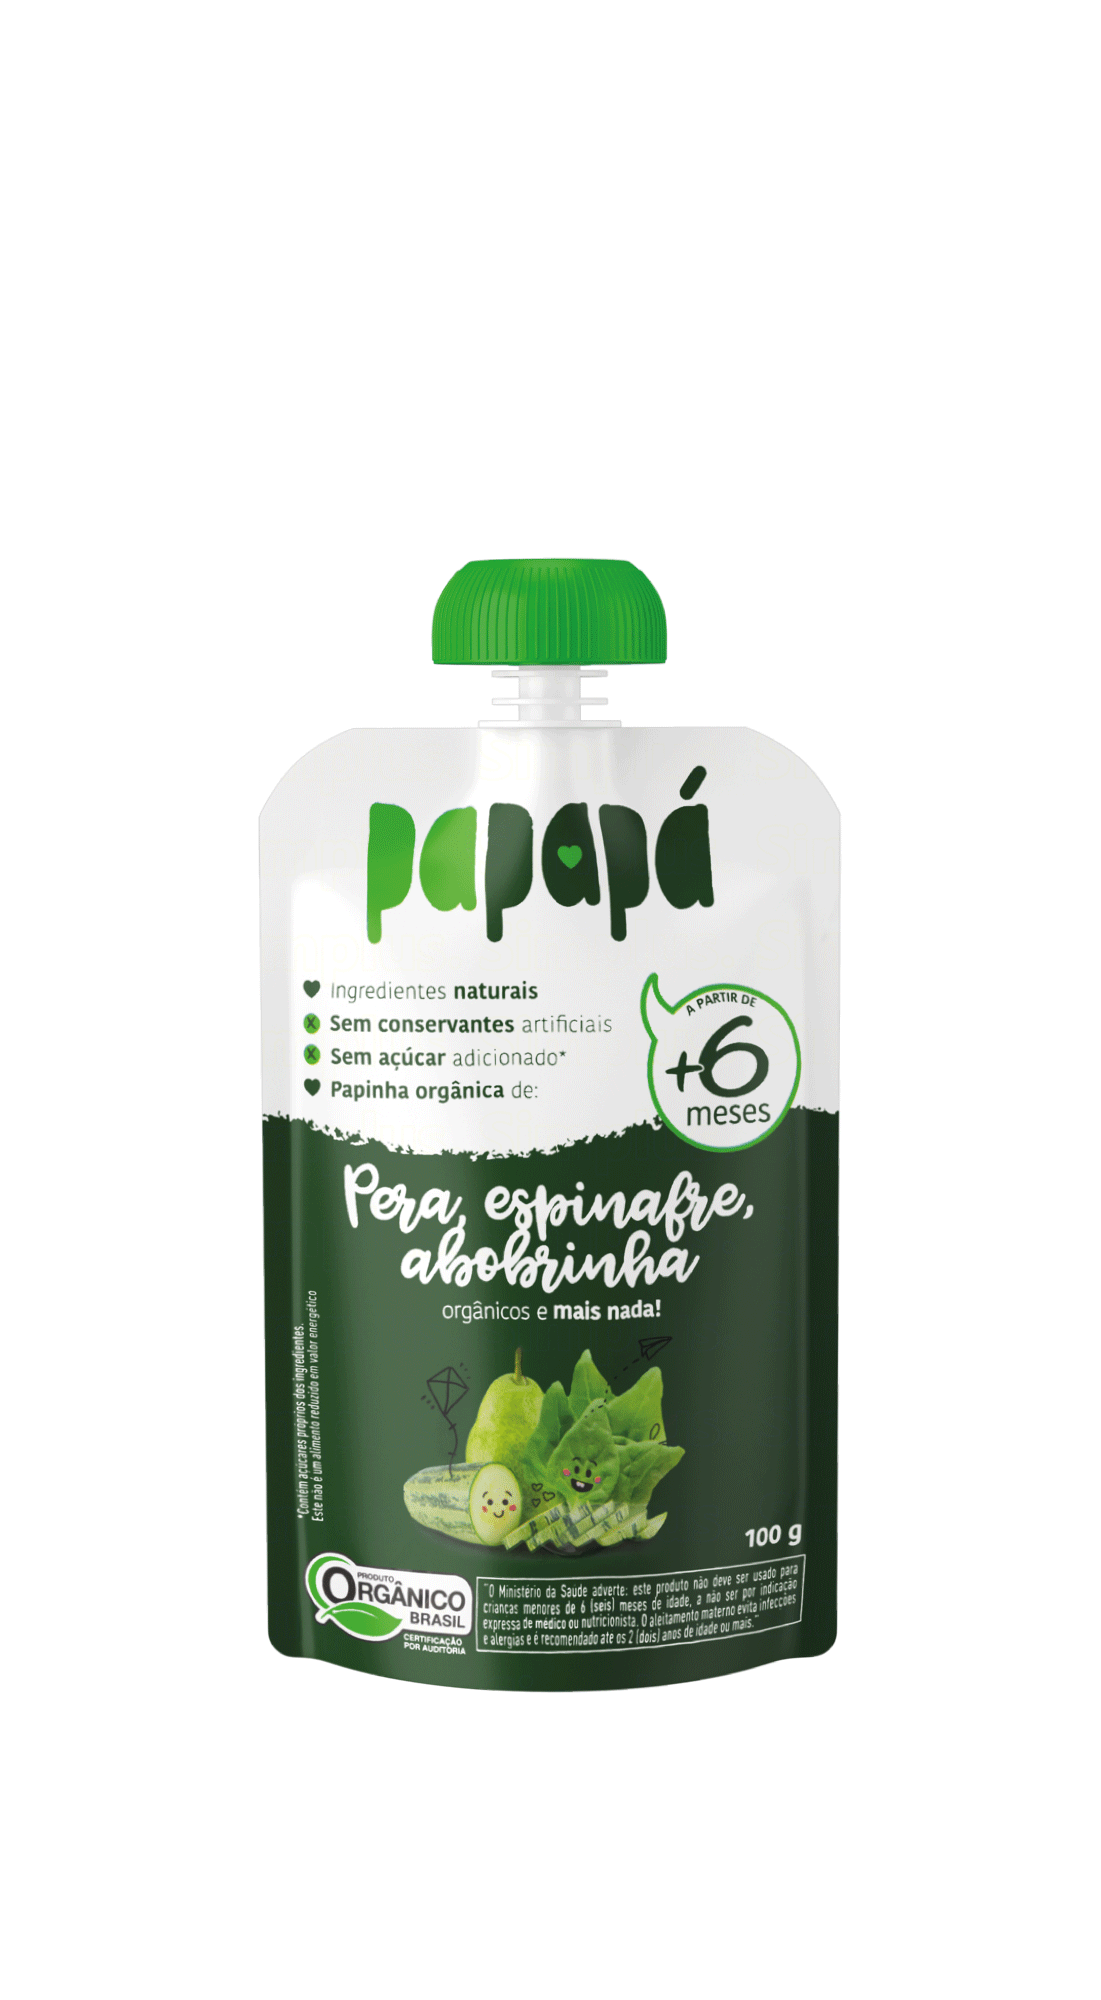 PAPAPA - Organic baby food | Pear, Spinach & Zucchini Puree - 100g - FINAL SALE - EXPIRED or CLOSE TO EXPIRY